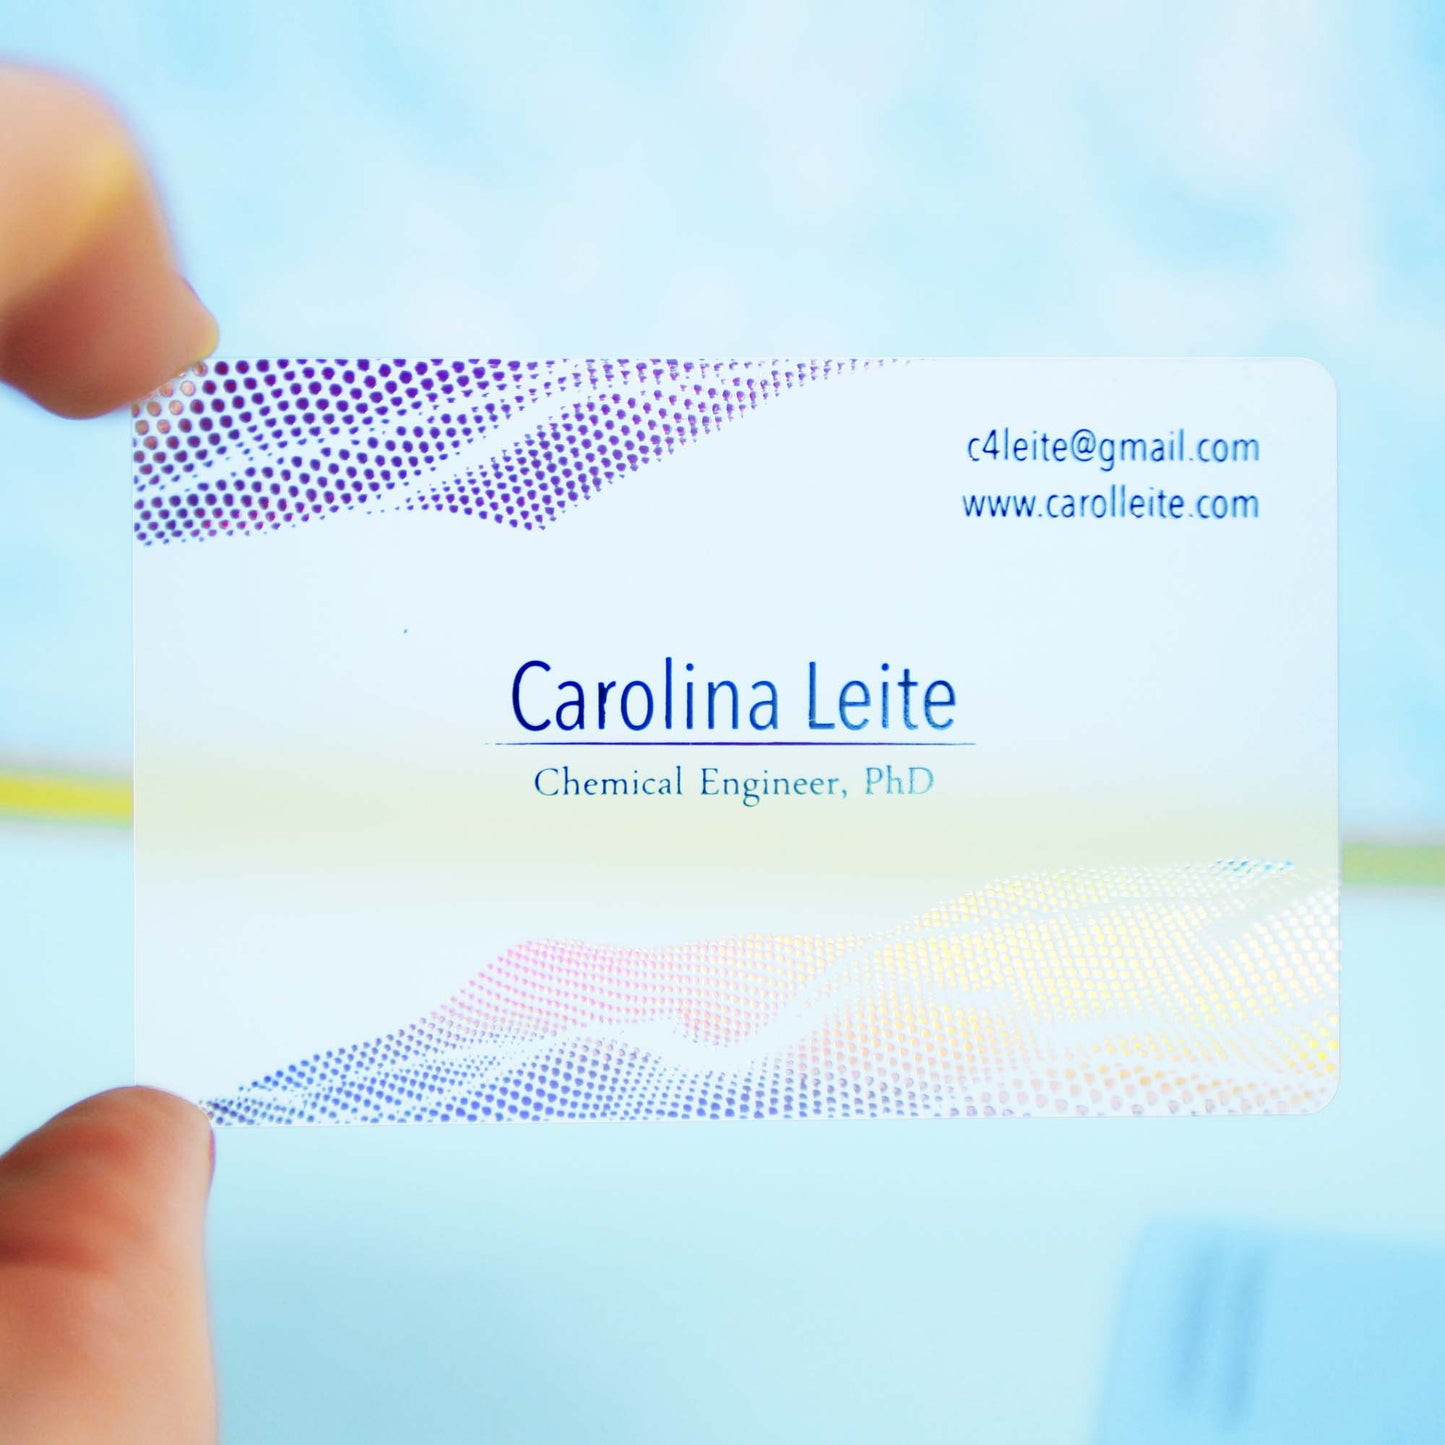 Frosted Plastic Business Cards - Holographic and Silver foils